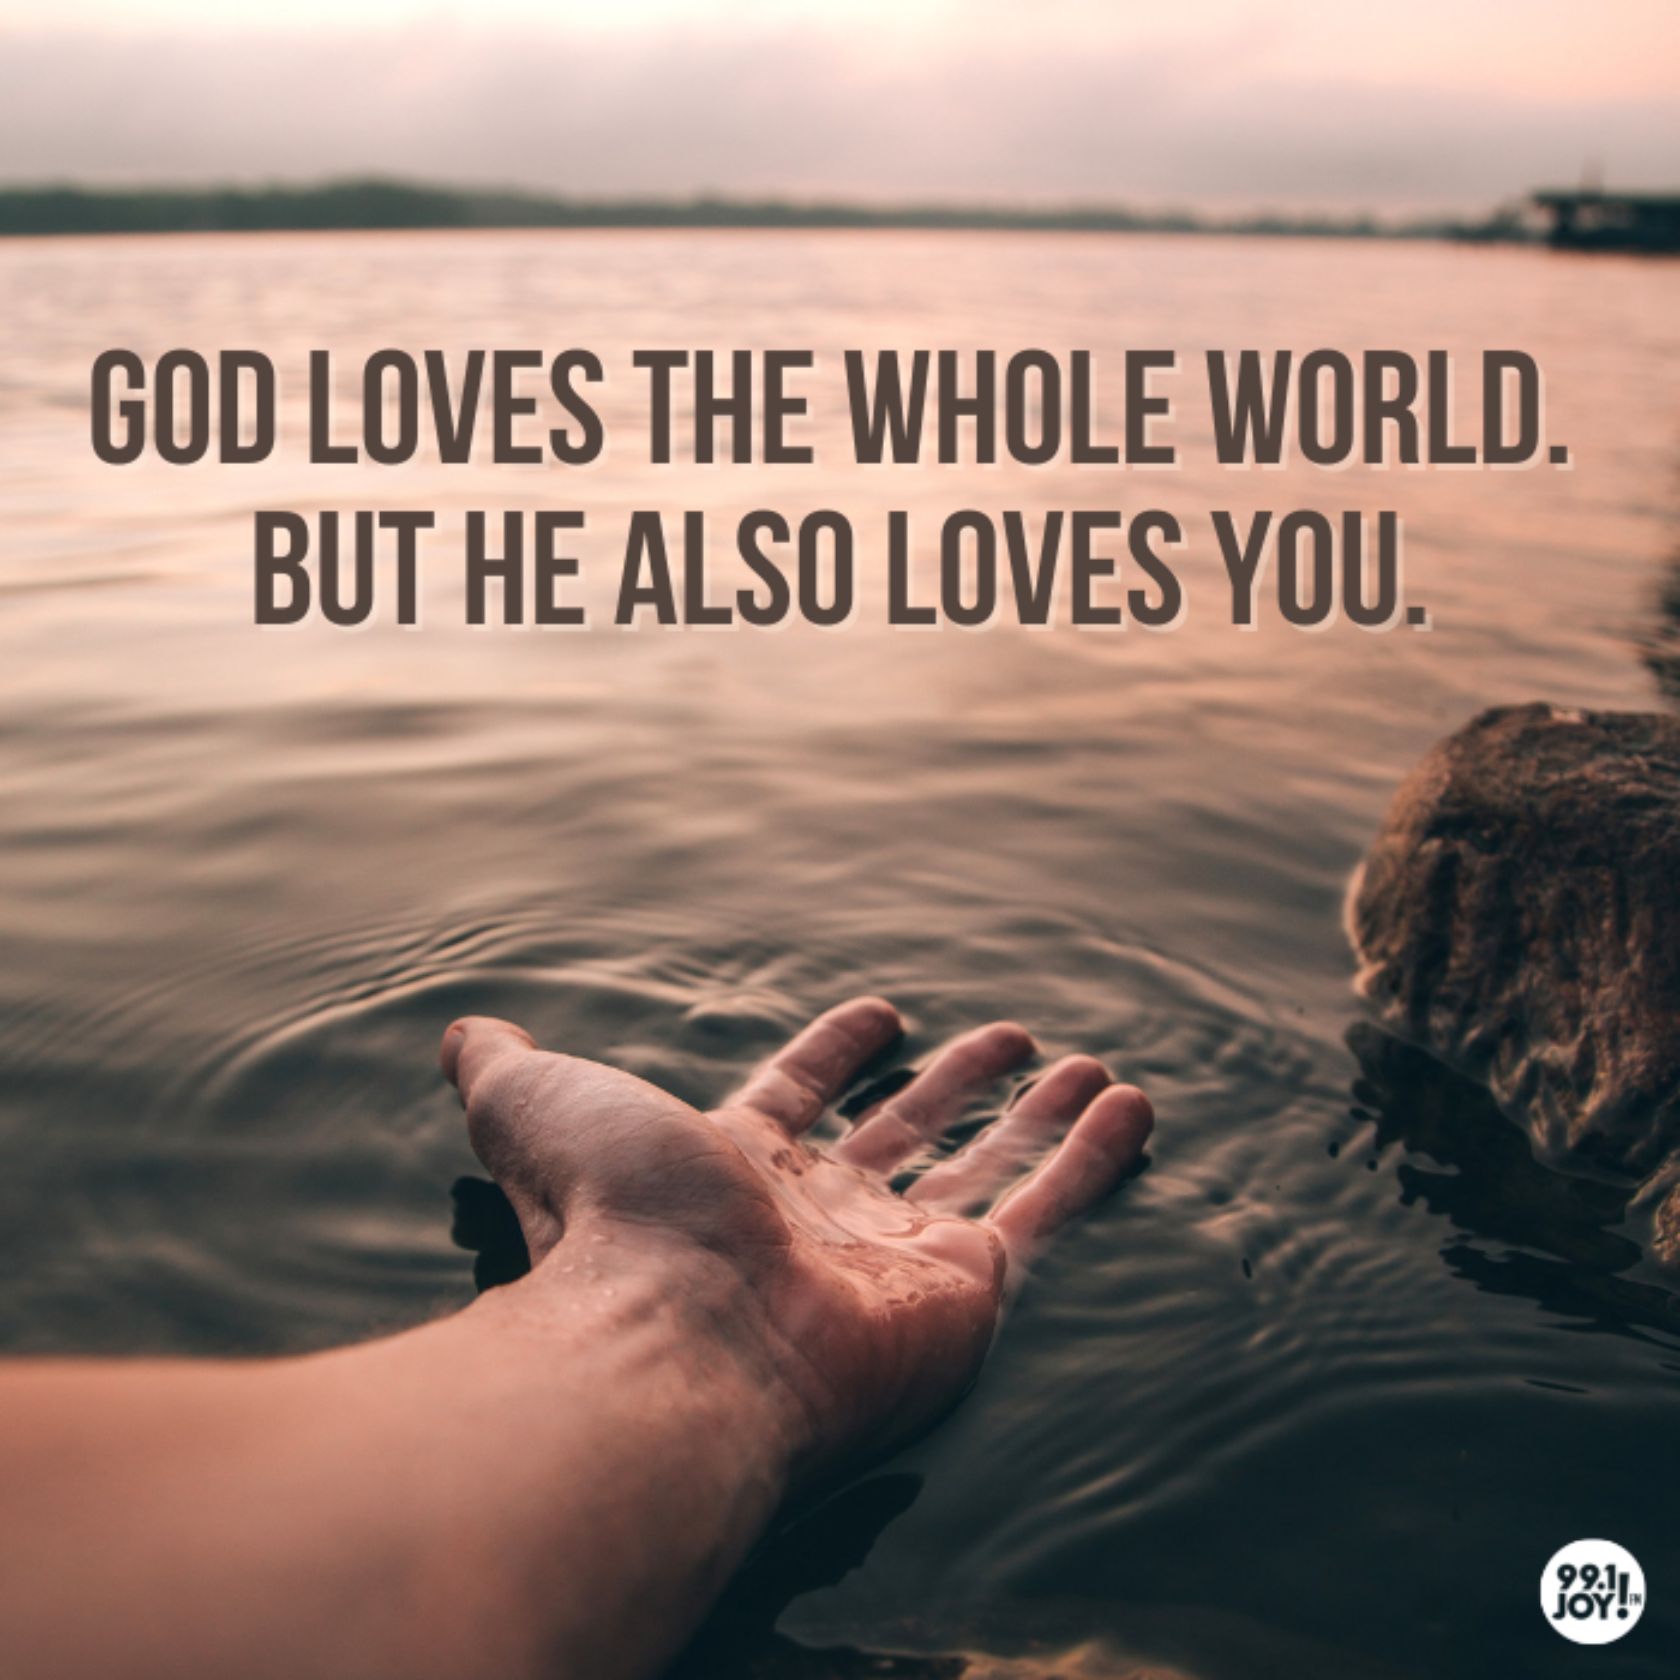 God Loves The Whole World. But He Also Loves You.